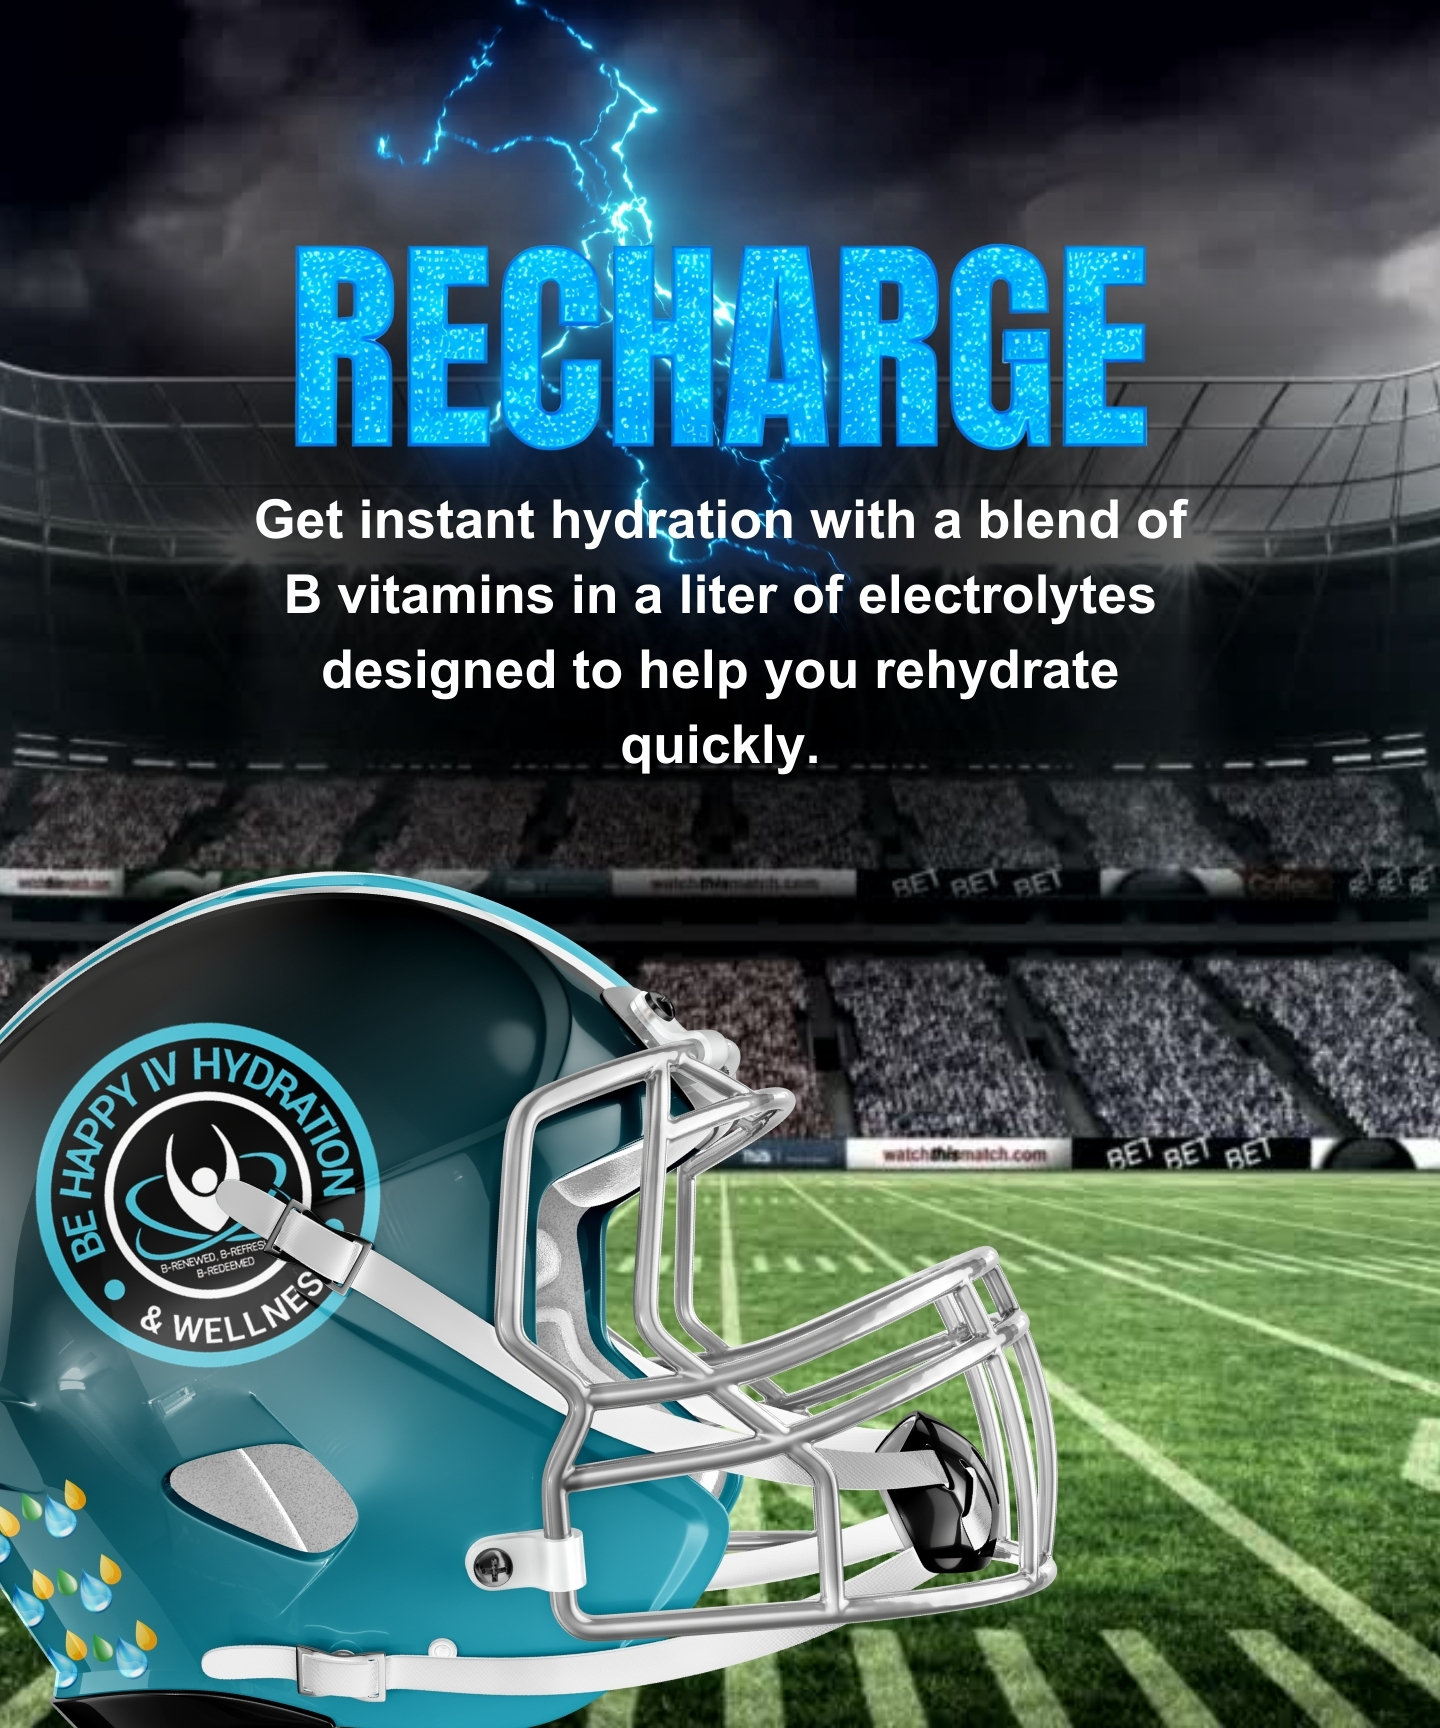 Get instant hydration with a blend of B vitamins in a liter of electrolytes designed to help you rehydrate quickly